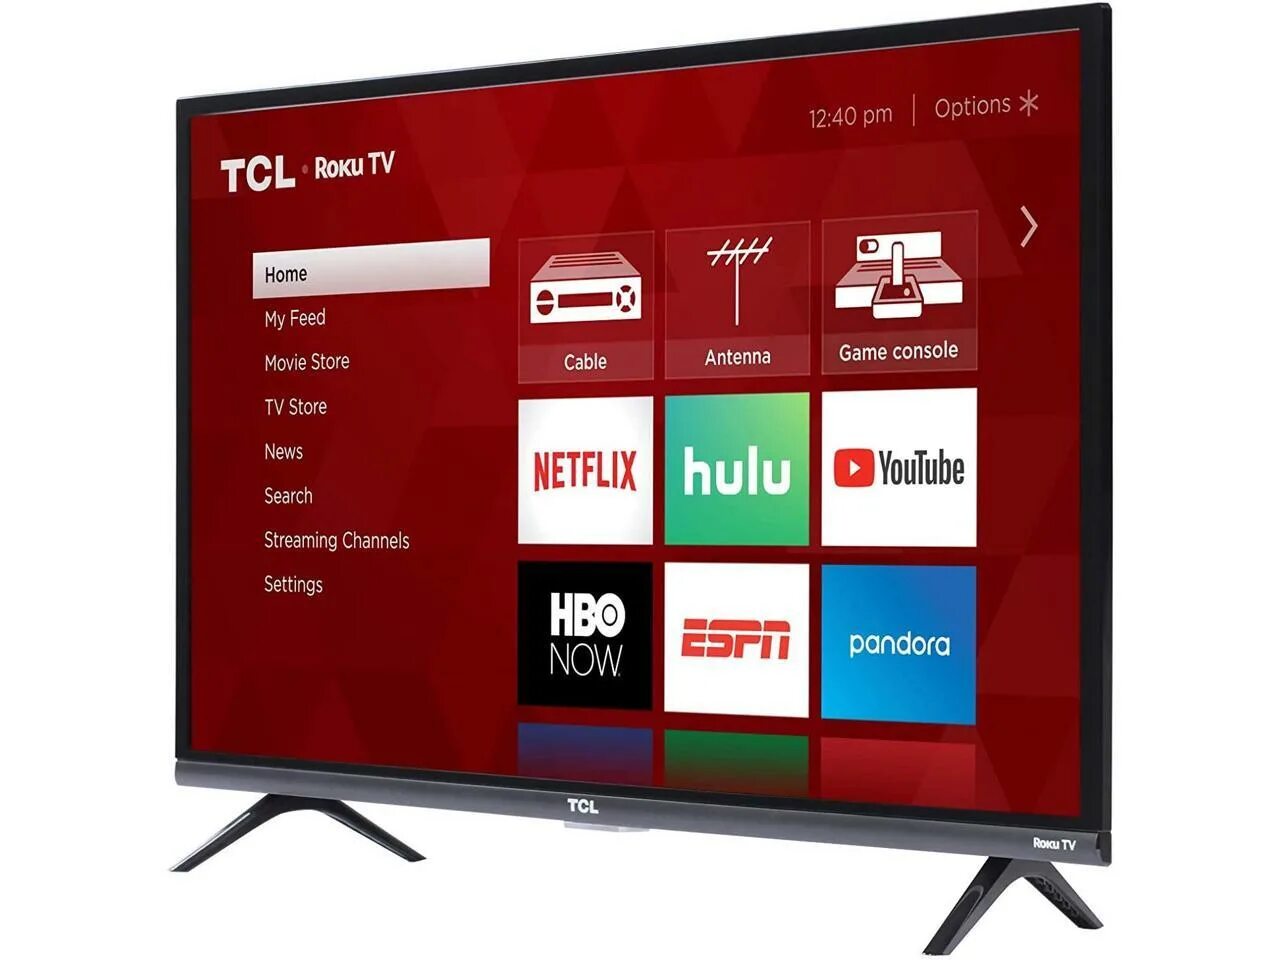 Телевизор TCL 32s65a. TCL 32s65a Smart TV. TCL 32s5400af. TCL 32s5400 32.